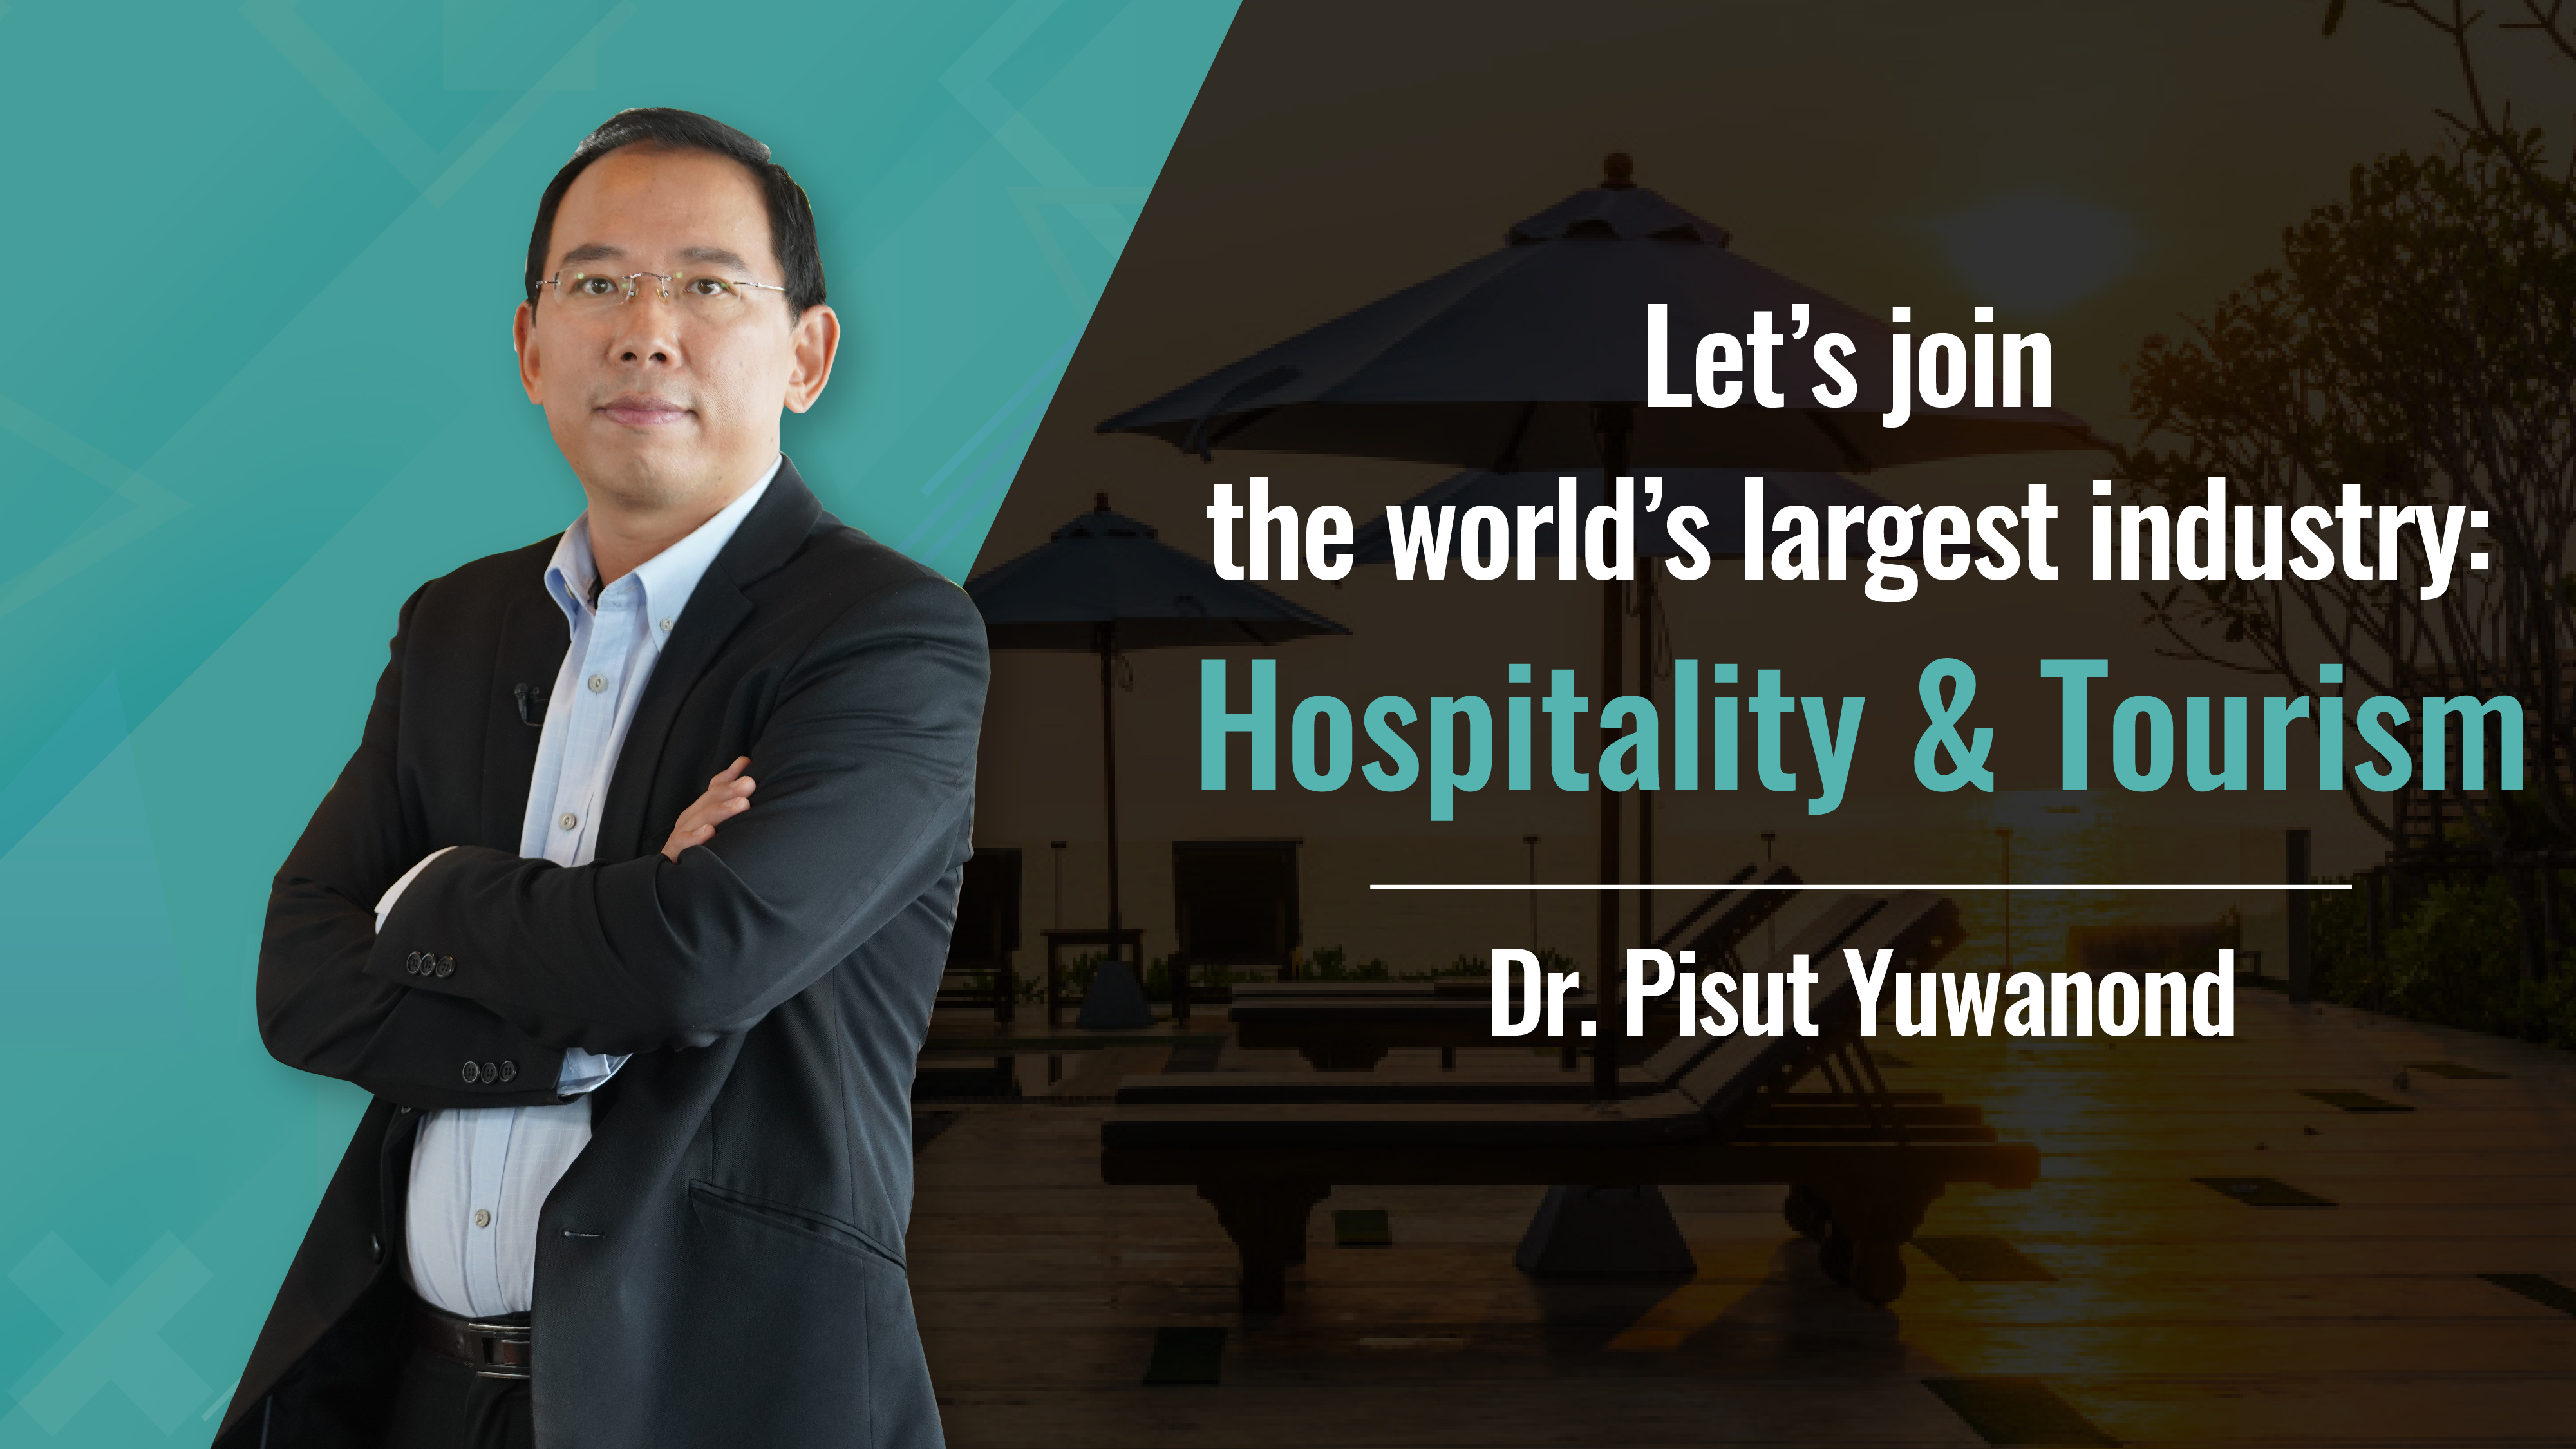 Let’s join the world’s largest industry Tourism & Hospitality 013